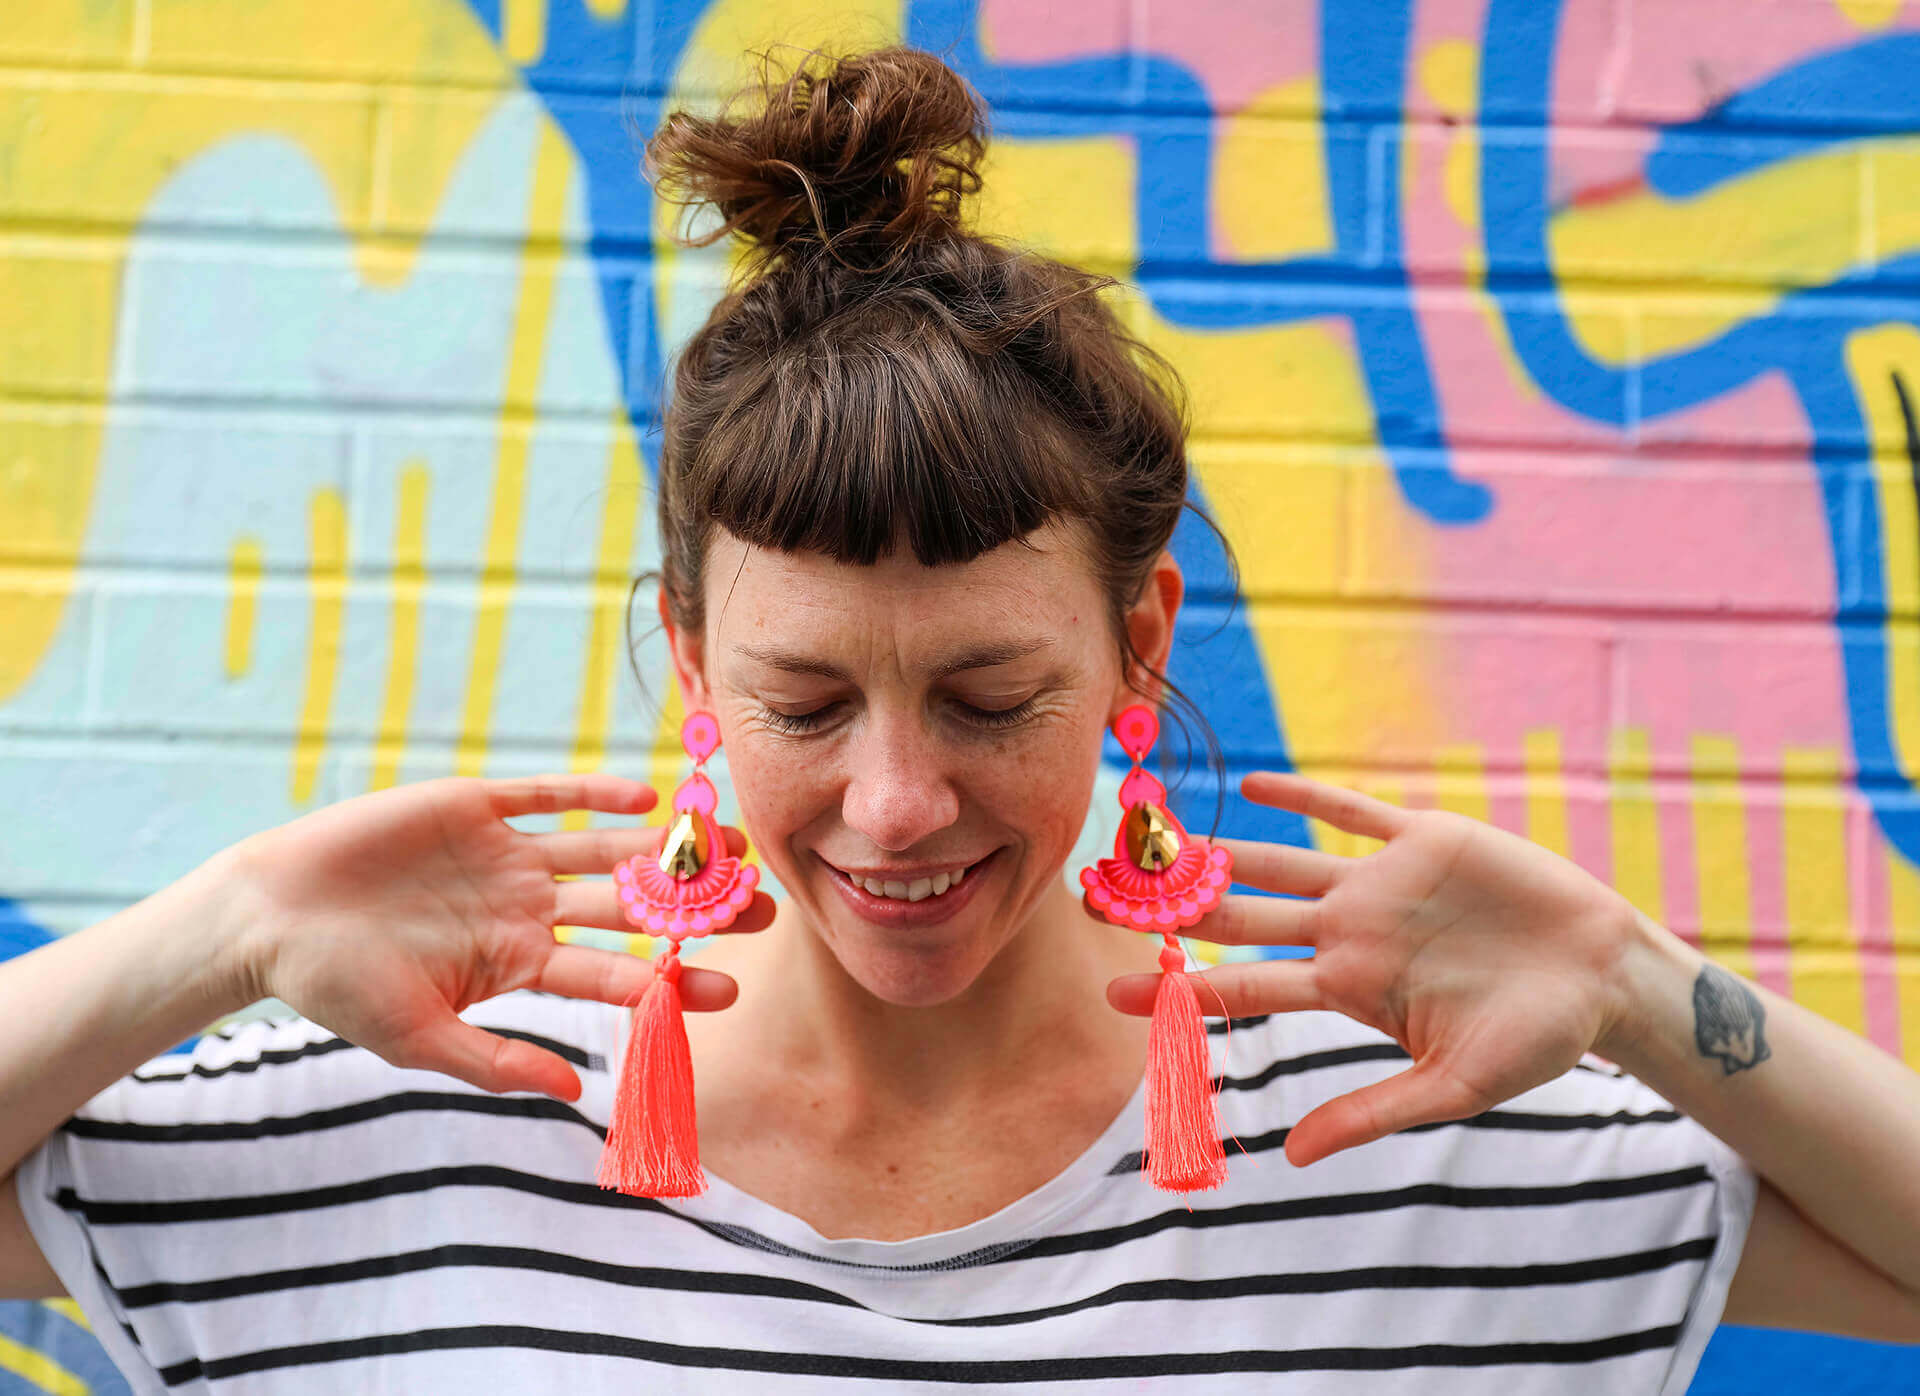 A woman with a short brown fringe wearing a black and white stripey t-shirt and large neon orange and pink statement tassel earrings is standing in front of a colourful graffiti covered wall. Her head is bowed and she is holding an open hand behind each ear to draw attention to her earrings